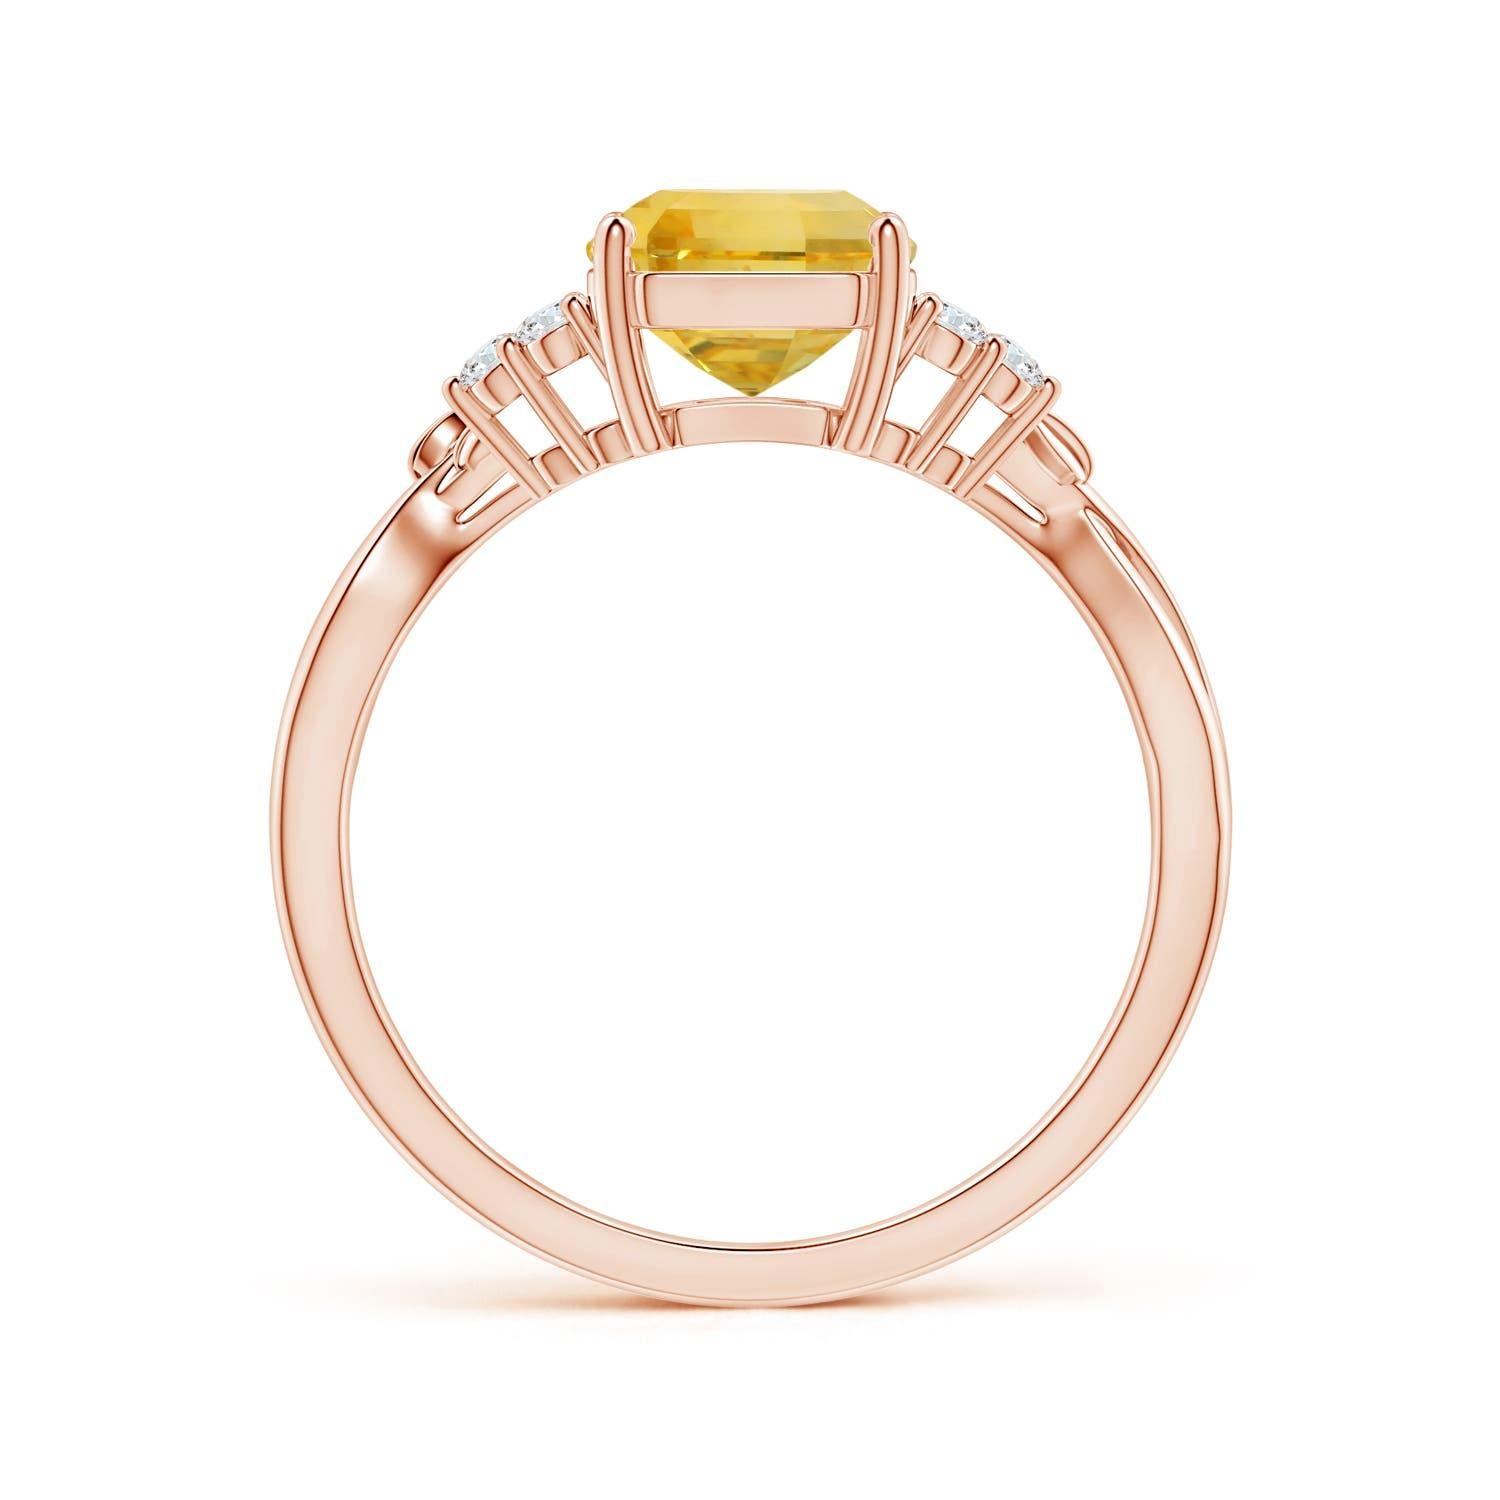 For Sale:  ANGARA GIA Certified Emerald-Cut Yellow Sapphire & Diamond Ring in Rose Gold  2